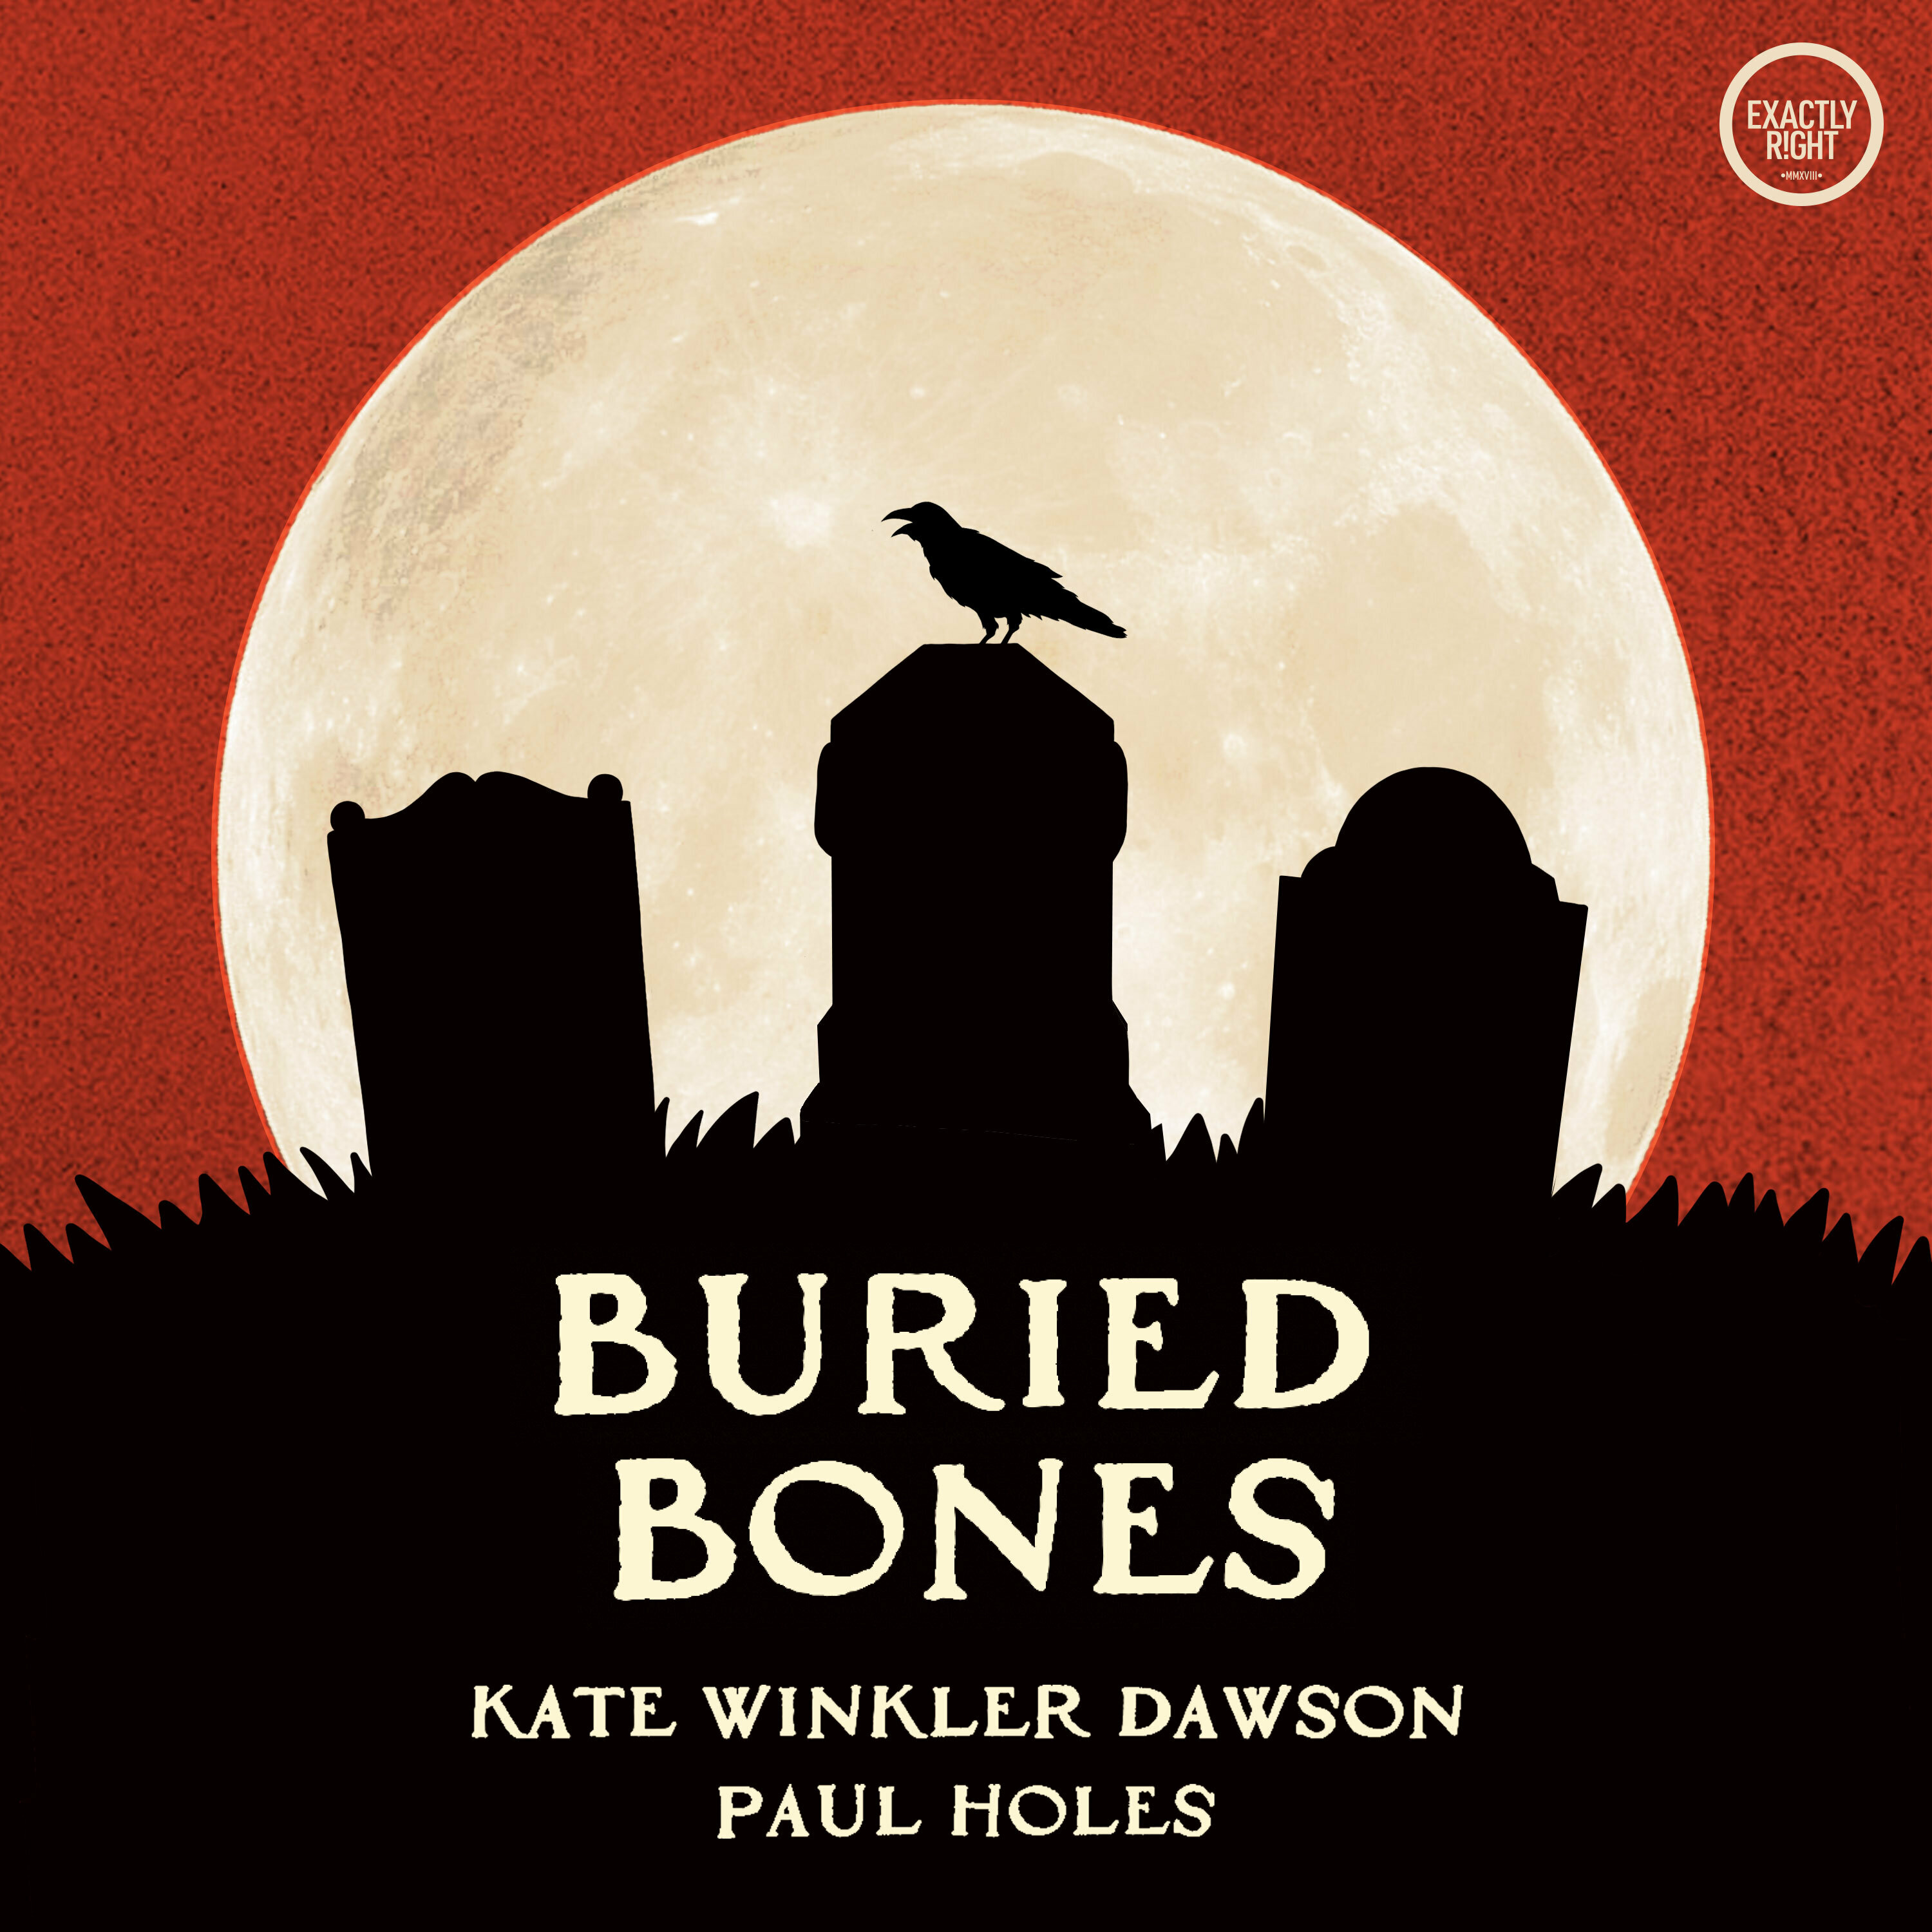 Buried Bones:Exactly Right